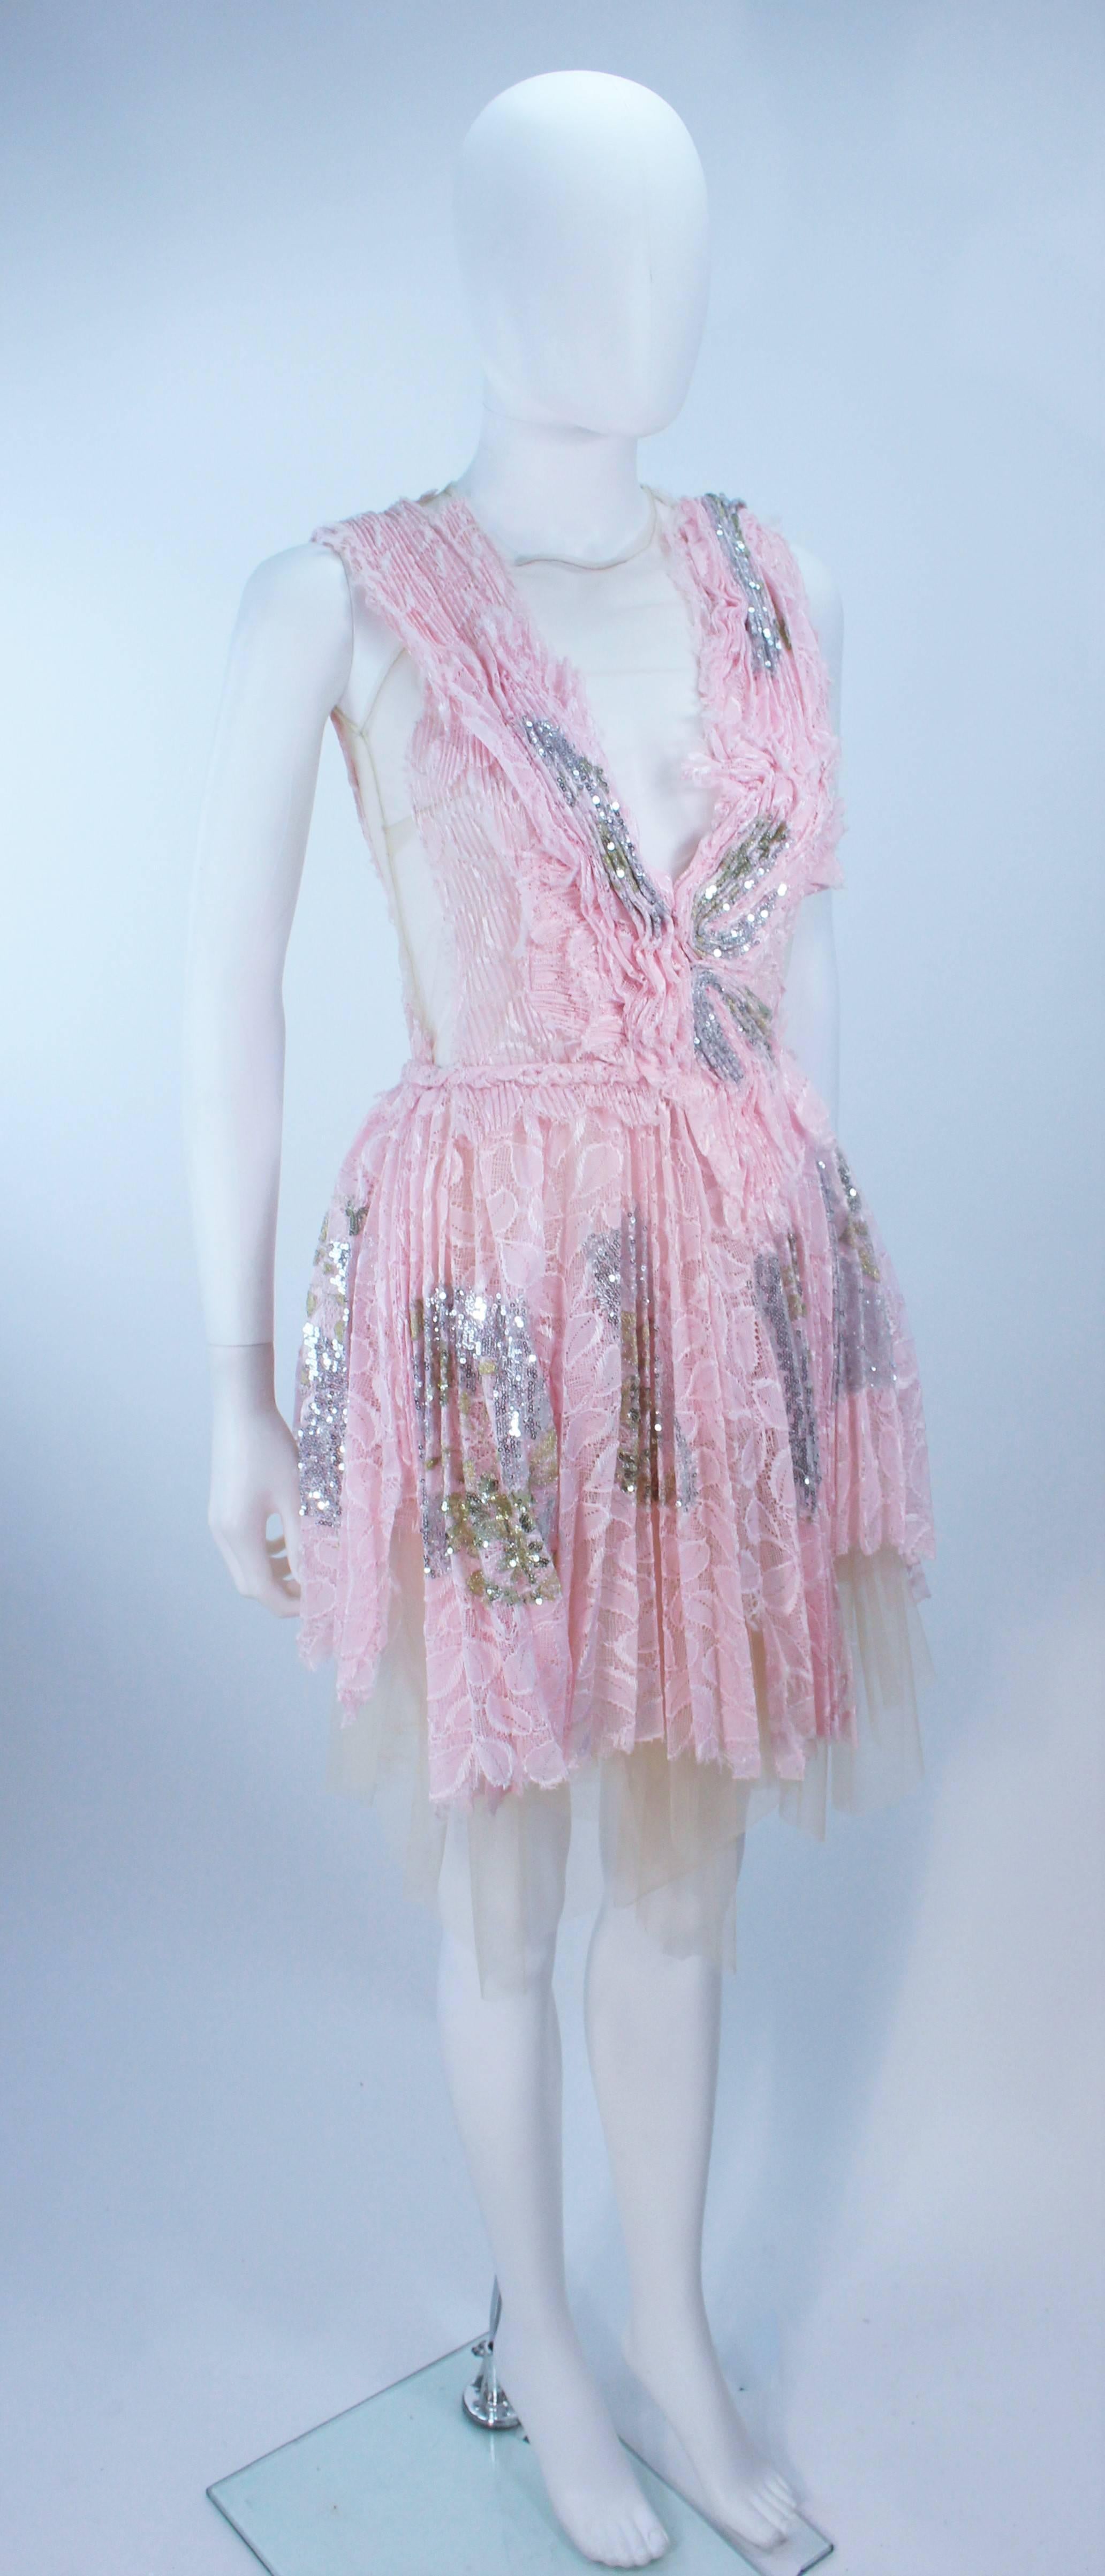 Women's MORALES Sheer Pink Applique Cocktail Dress with Sequins Size 2 For Sale